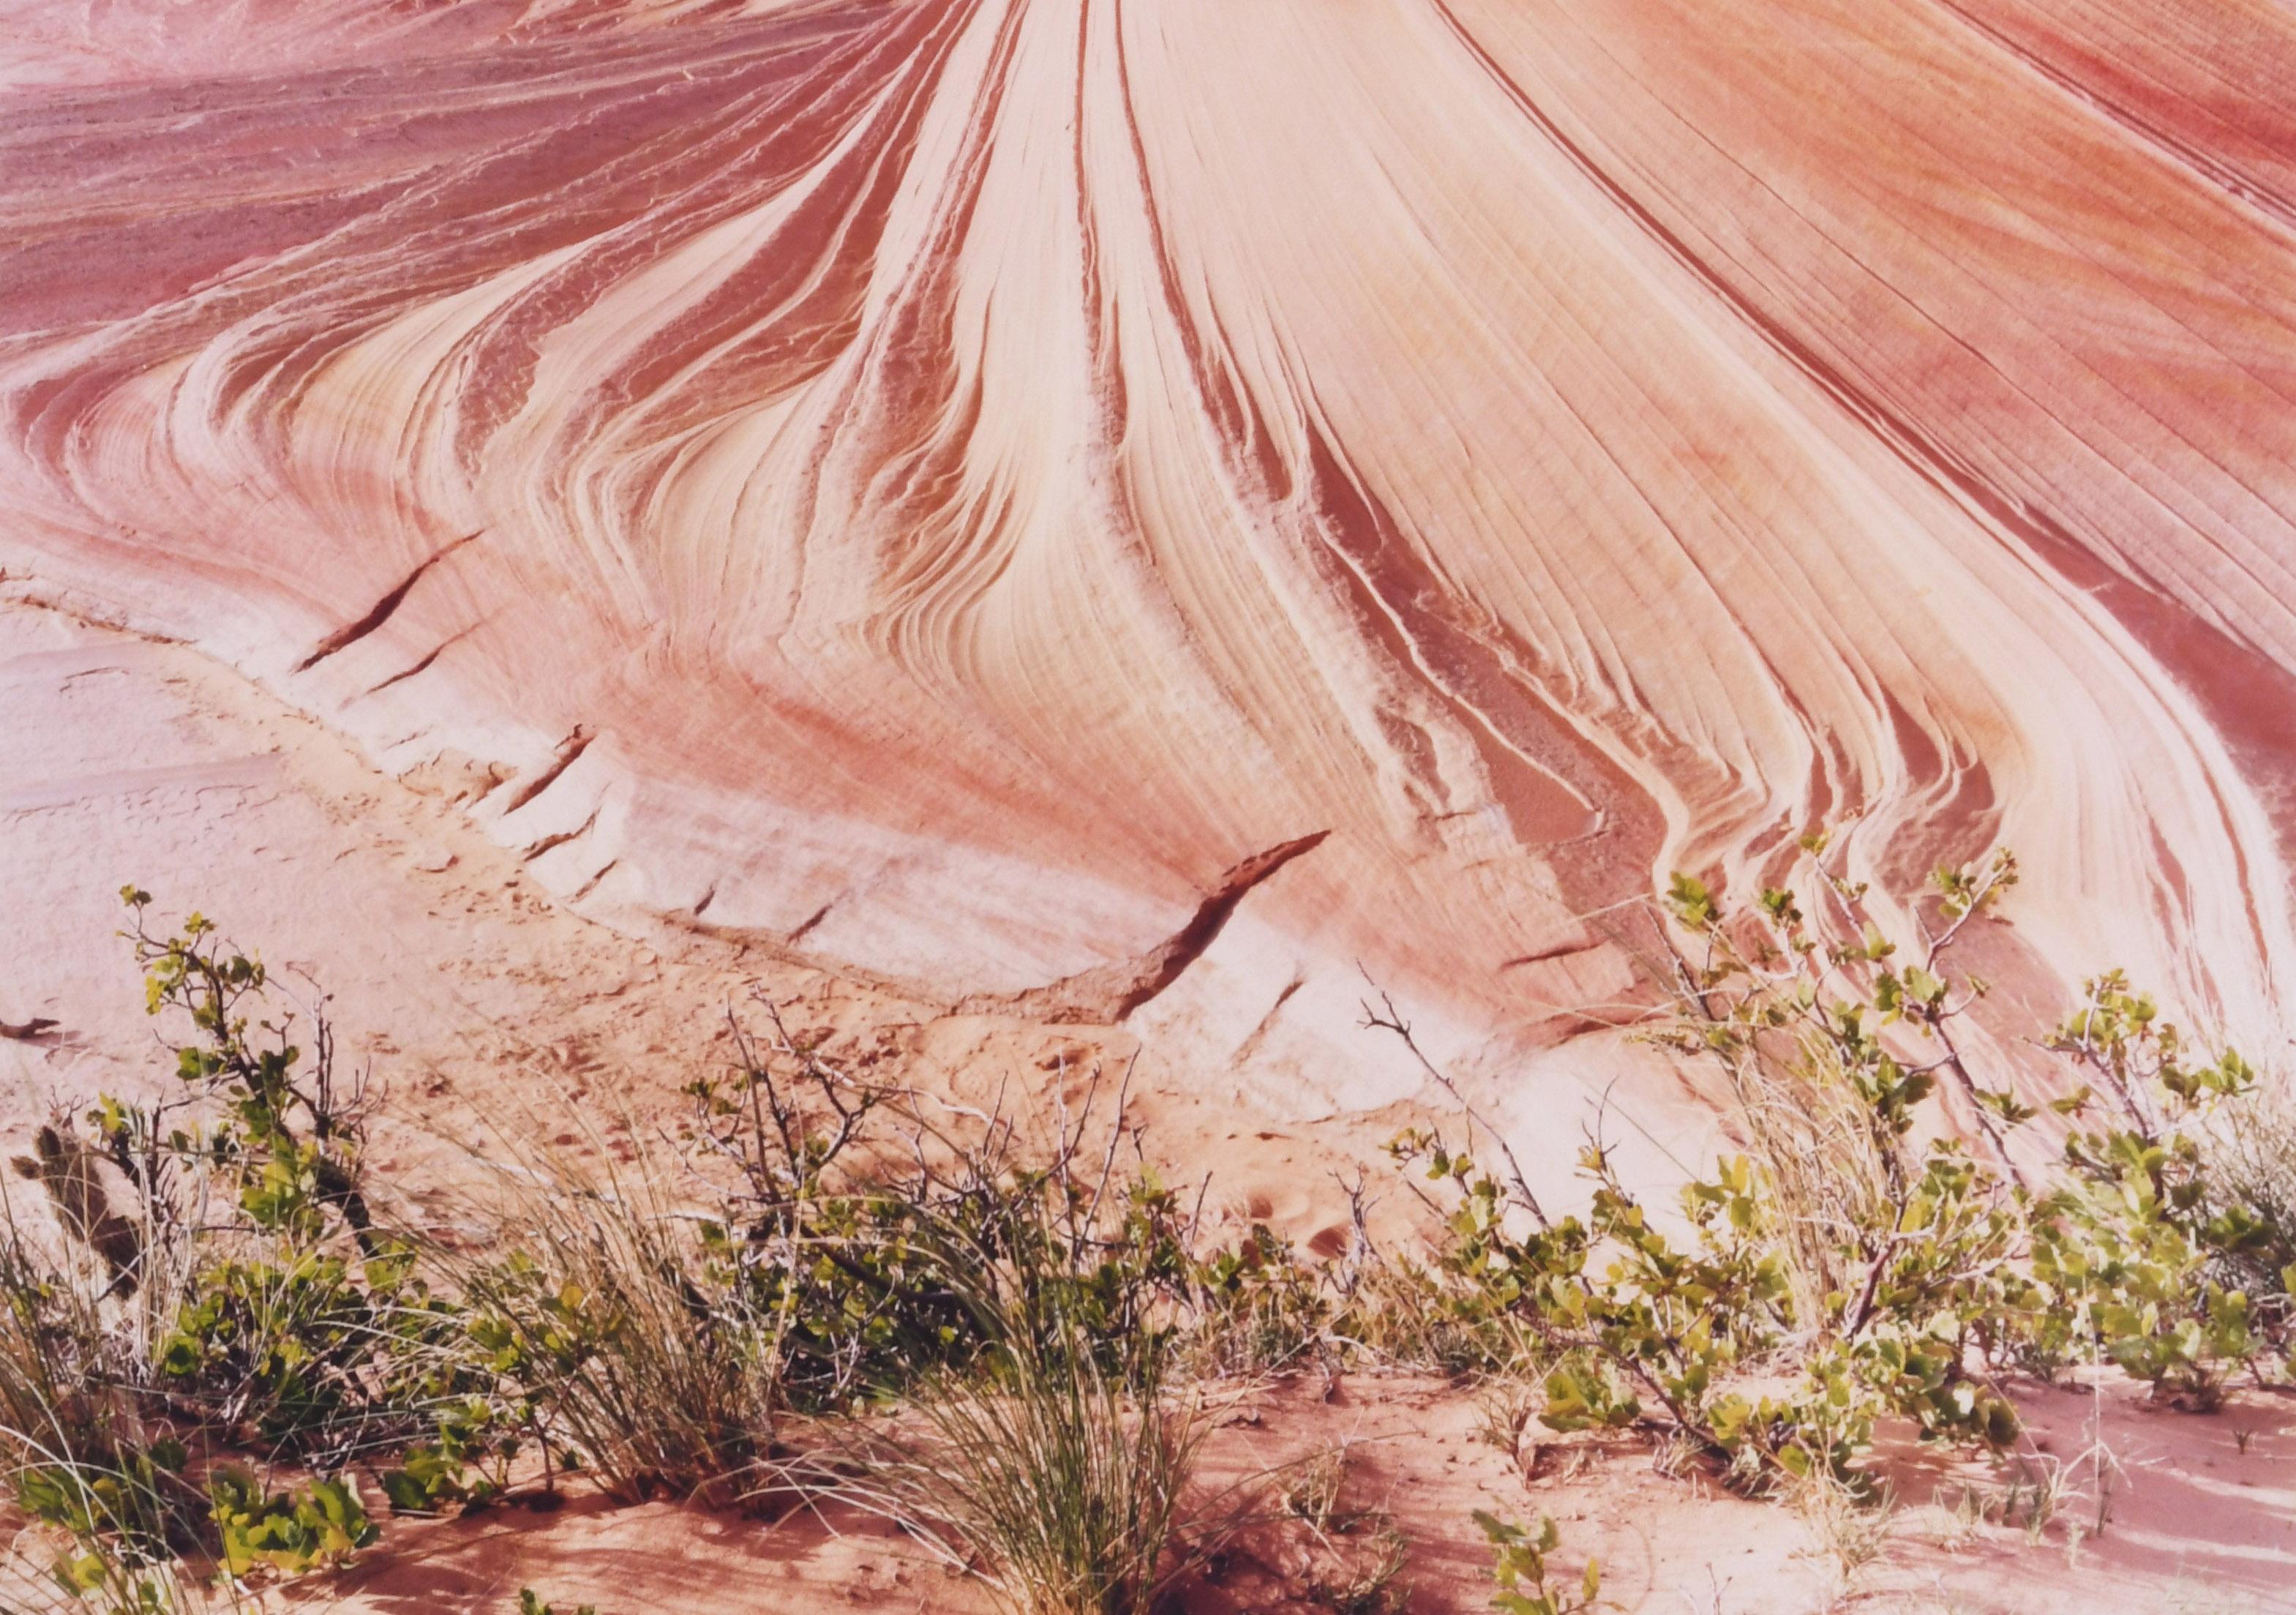 The Second Wave, Coyote Buttes, Paria Canyon-Vermilion Clifts Wilderness, AR - Brown Landscape Photograph by Unknown